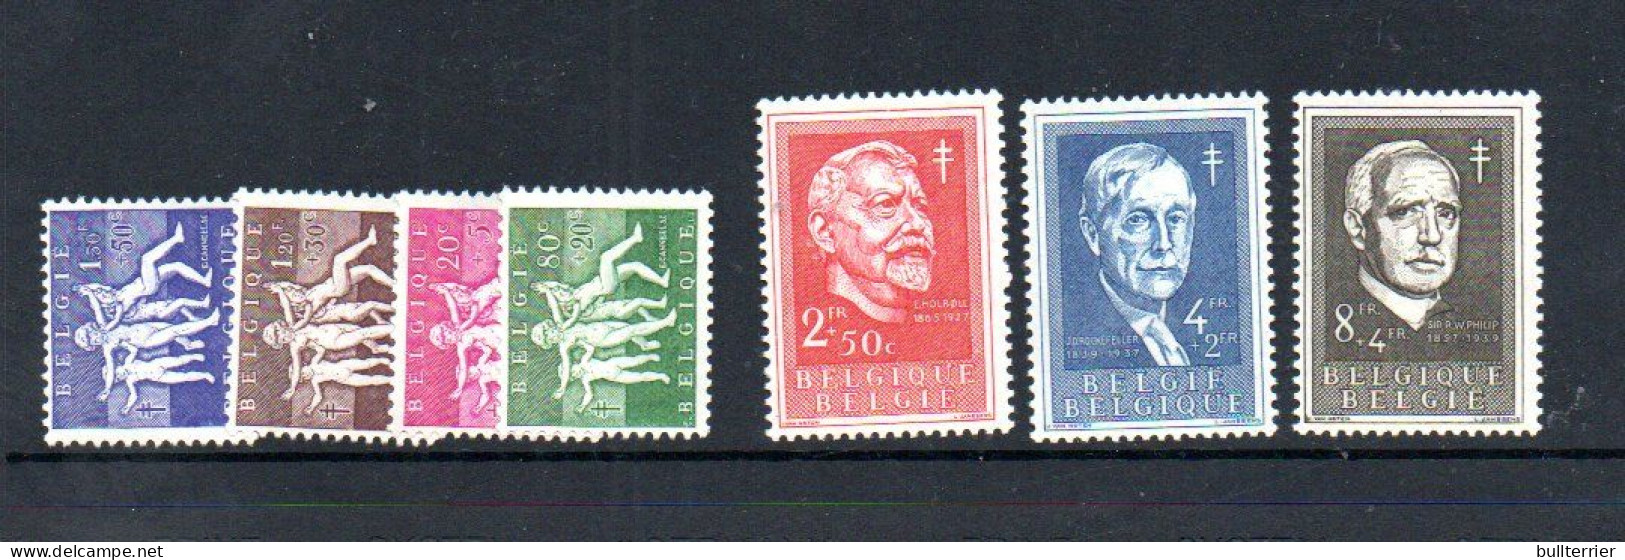 BELGIUM - 1955  - ANTB FUNDS SET OF 7  MINT NEVER HINGED , SG CAT £90+ - Nuovi